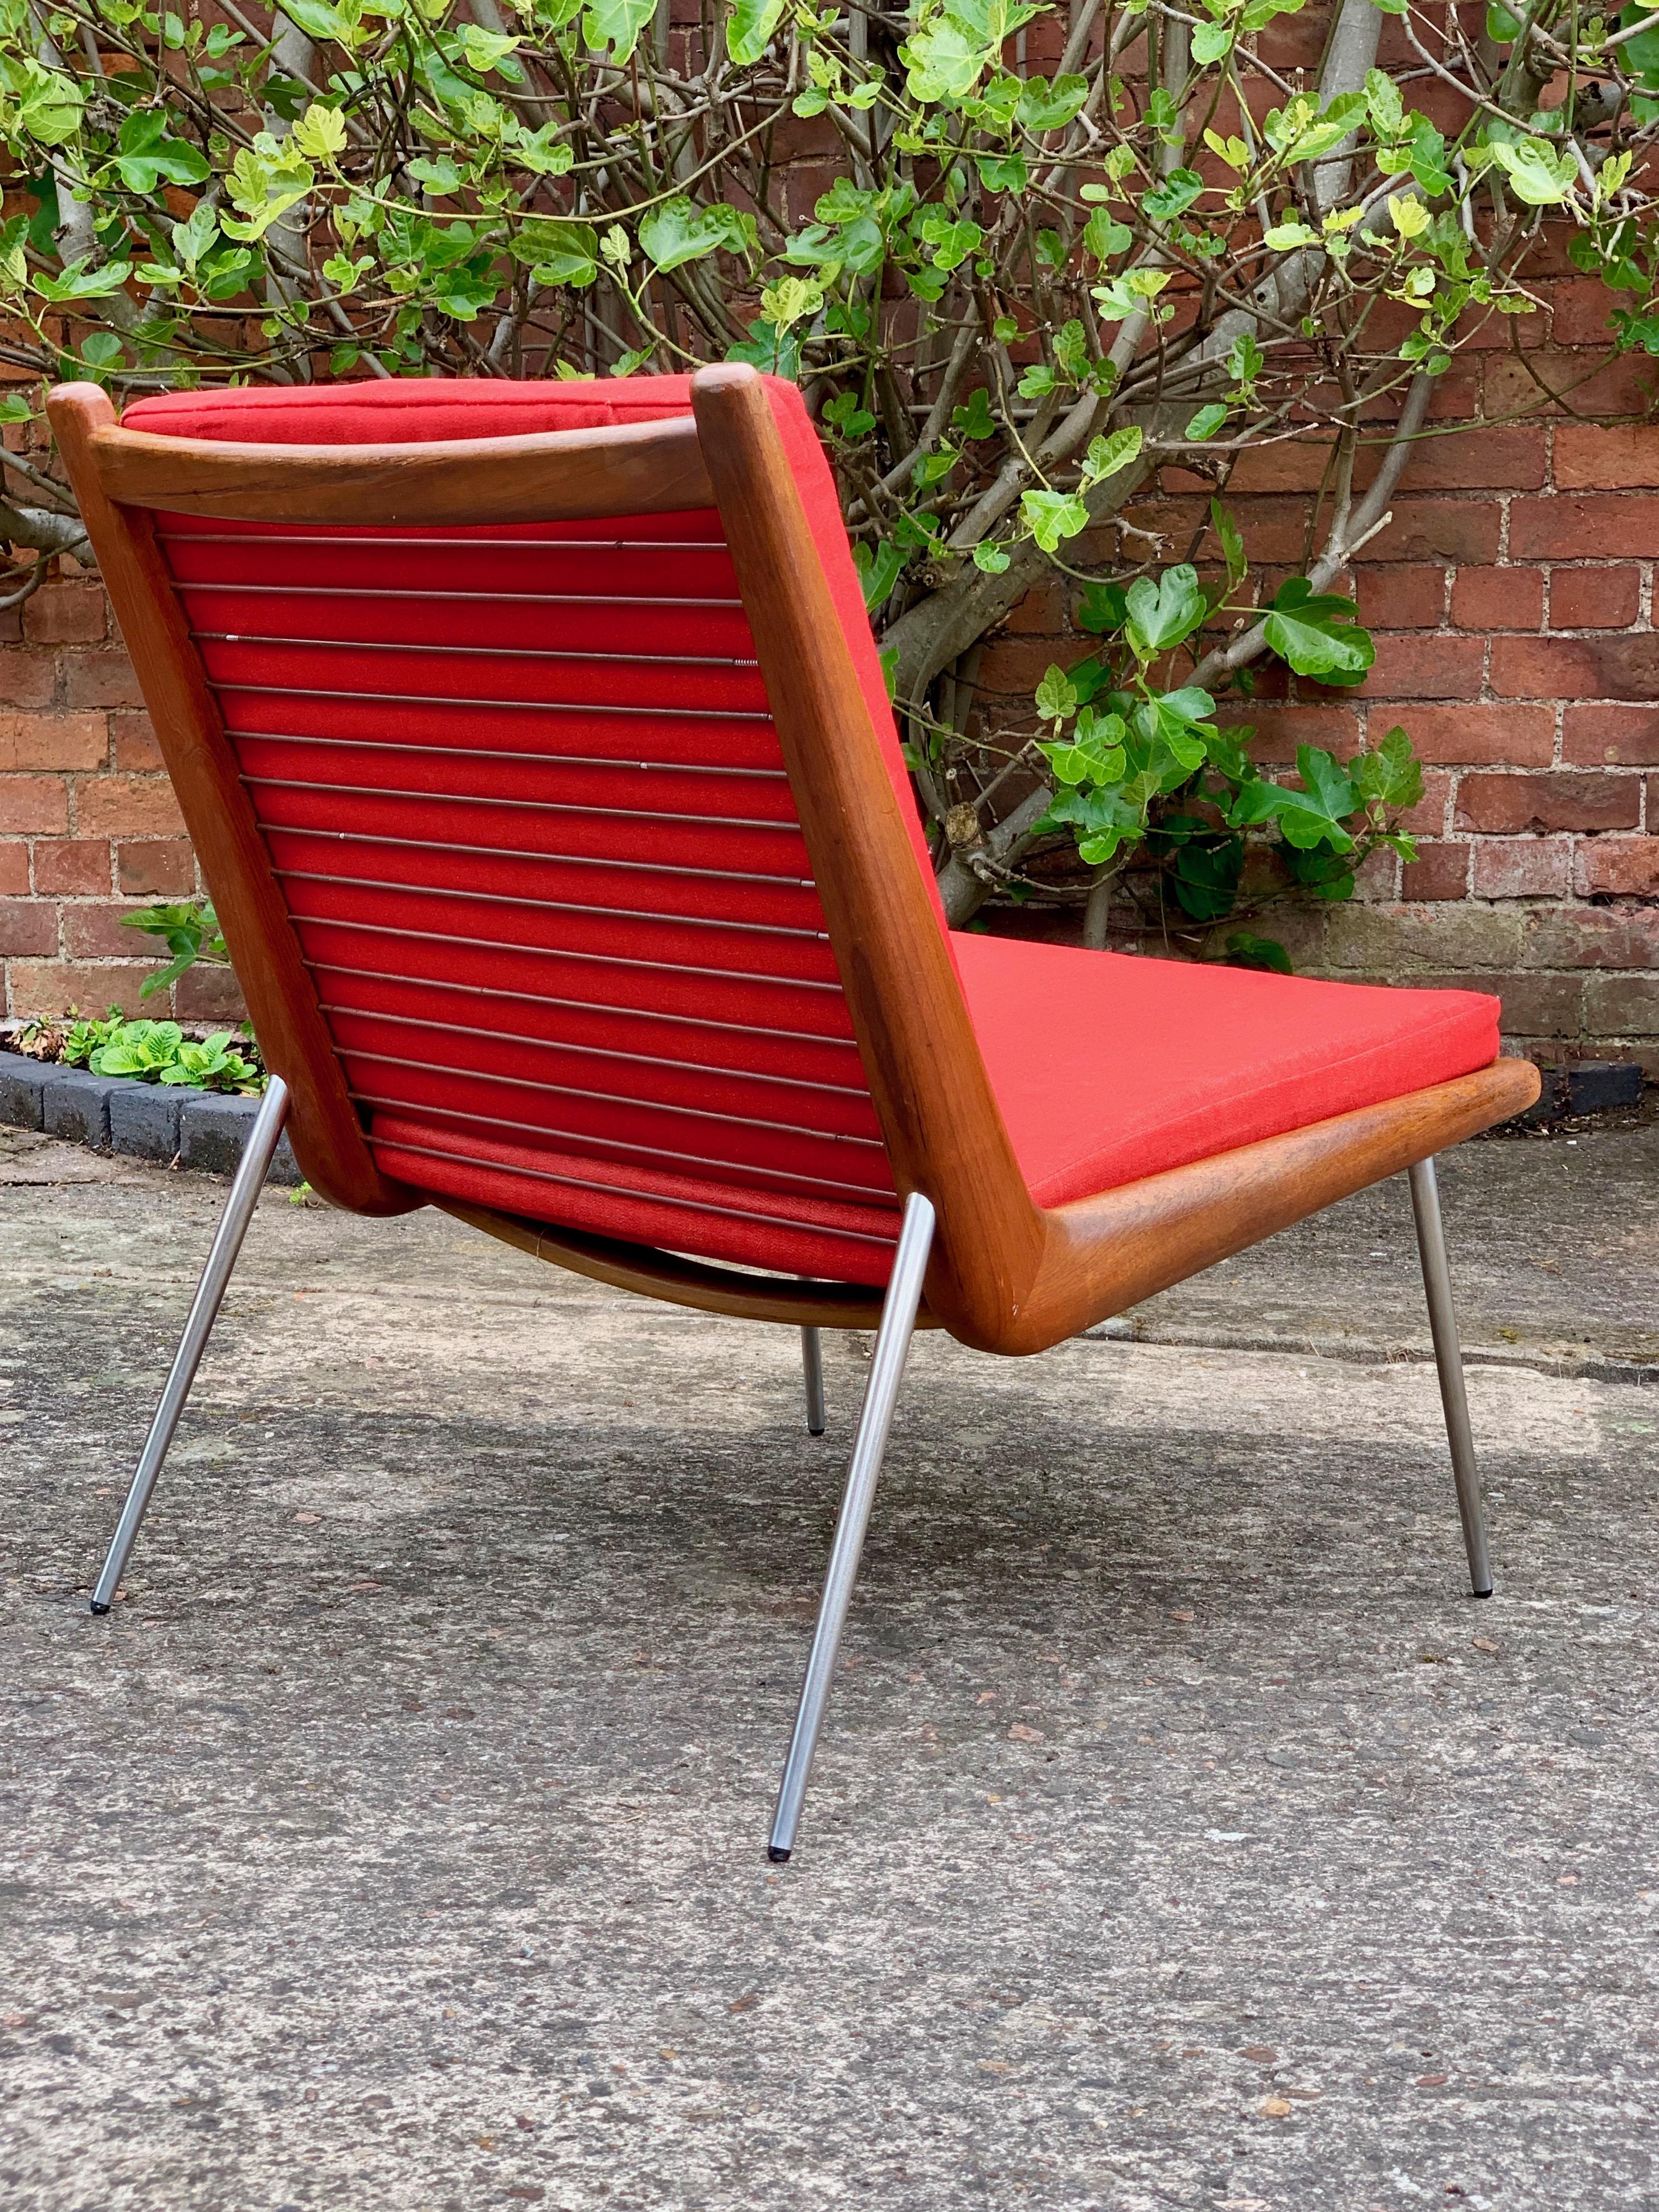 Peter Hvidt & Orla Molgaard Nielsen boomerang chair Manufactured by France & Son 1950s chair number 3

Stunning original boomerang chair by Peter Hvidt and Orla Molgaard Nielsen manufactured by France & Daverkosen, Denmark, the teak frame with two